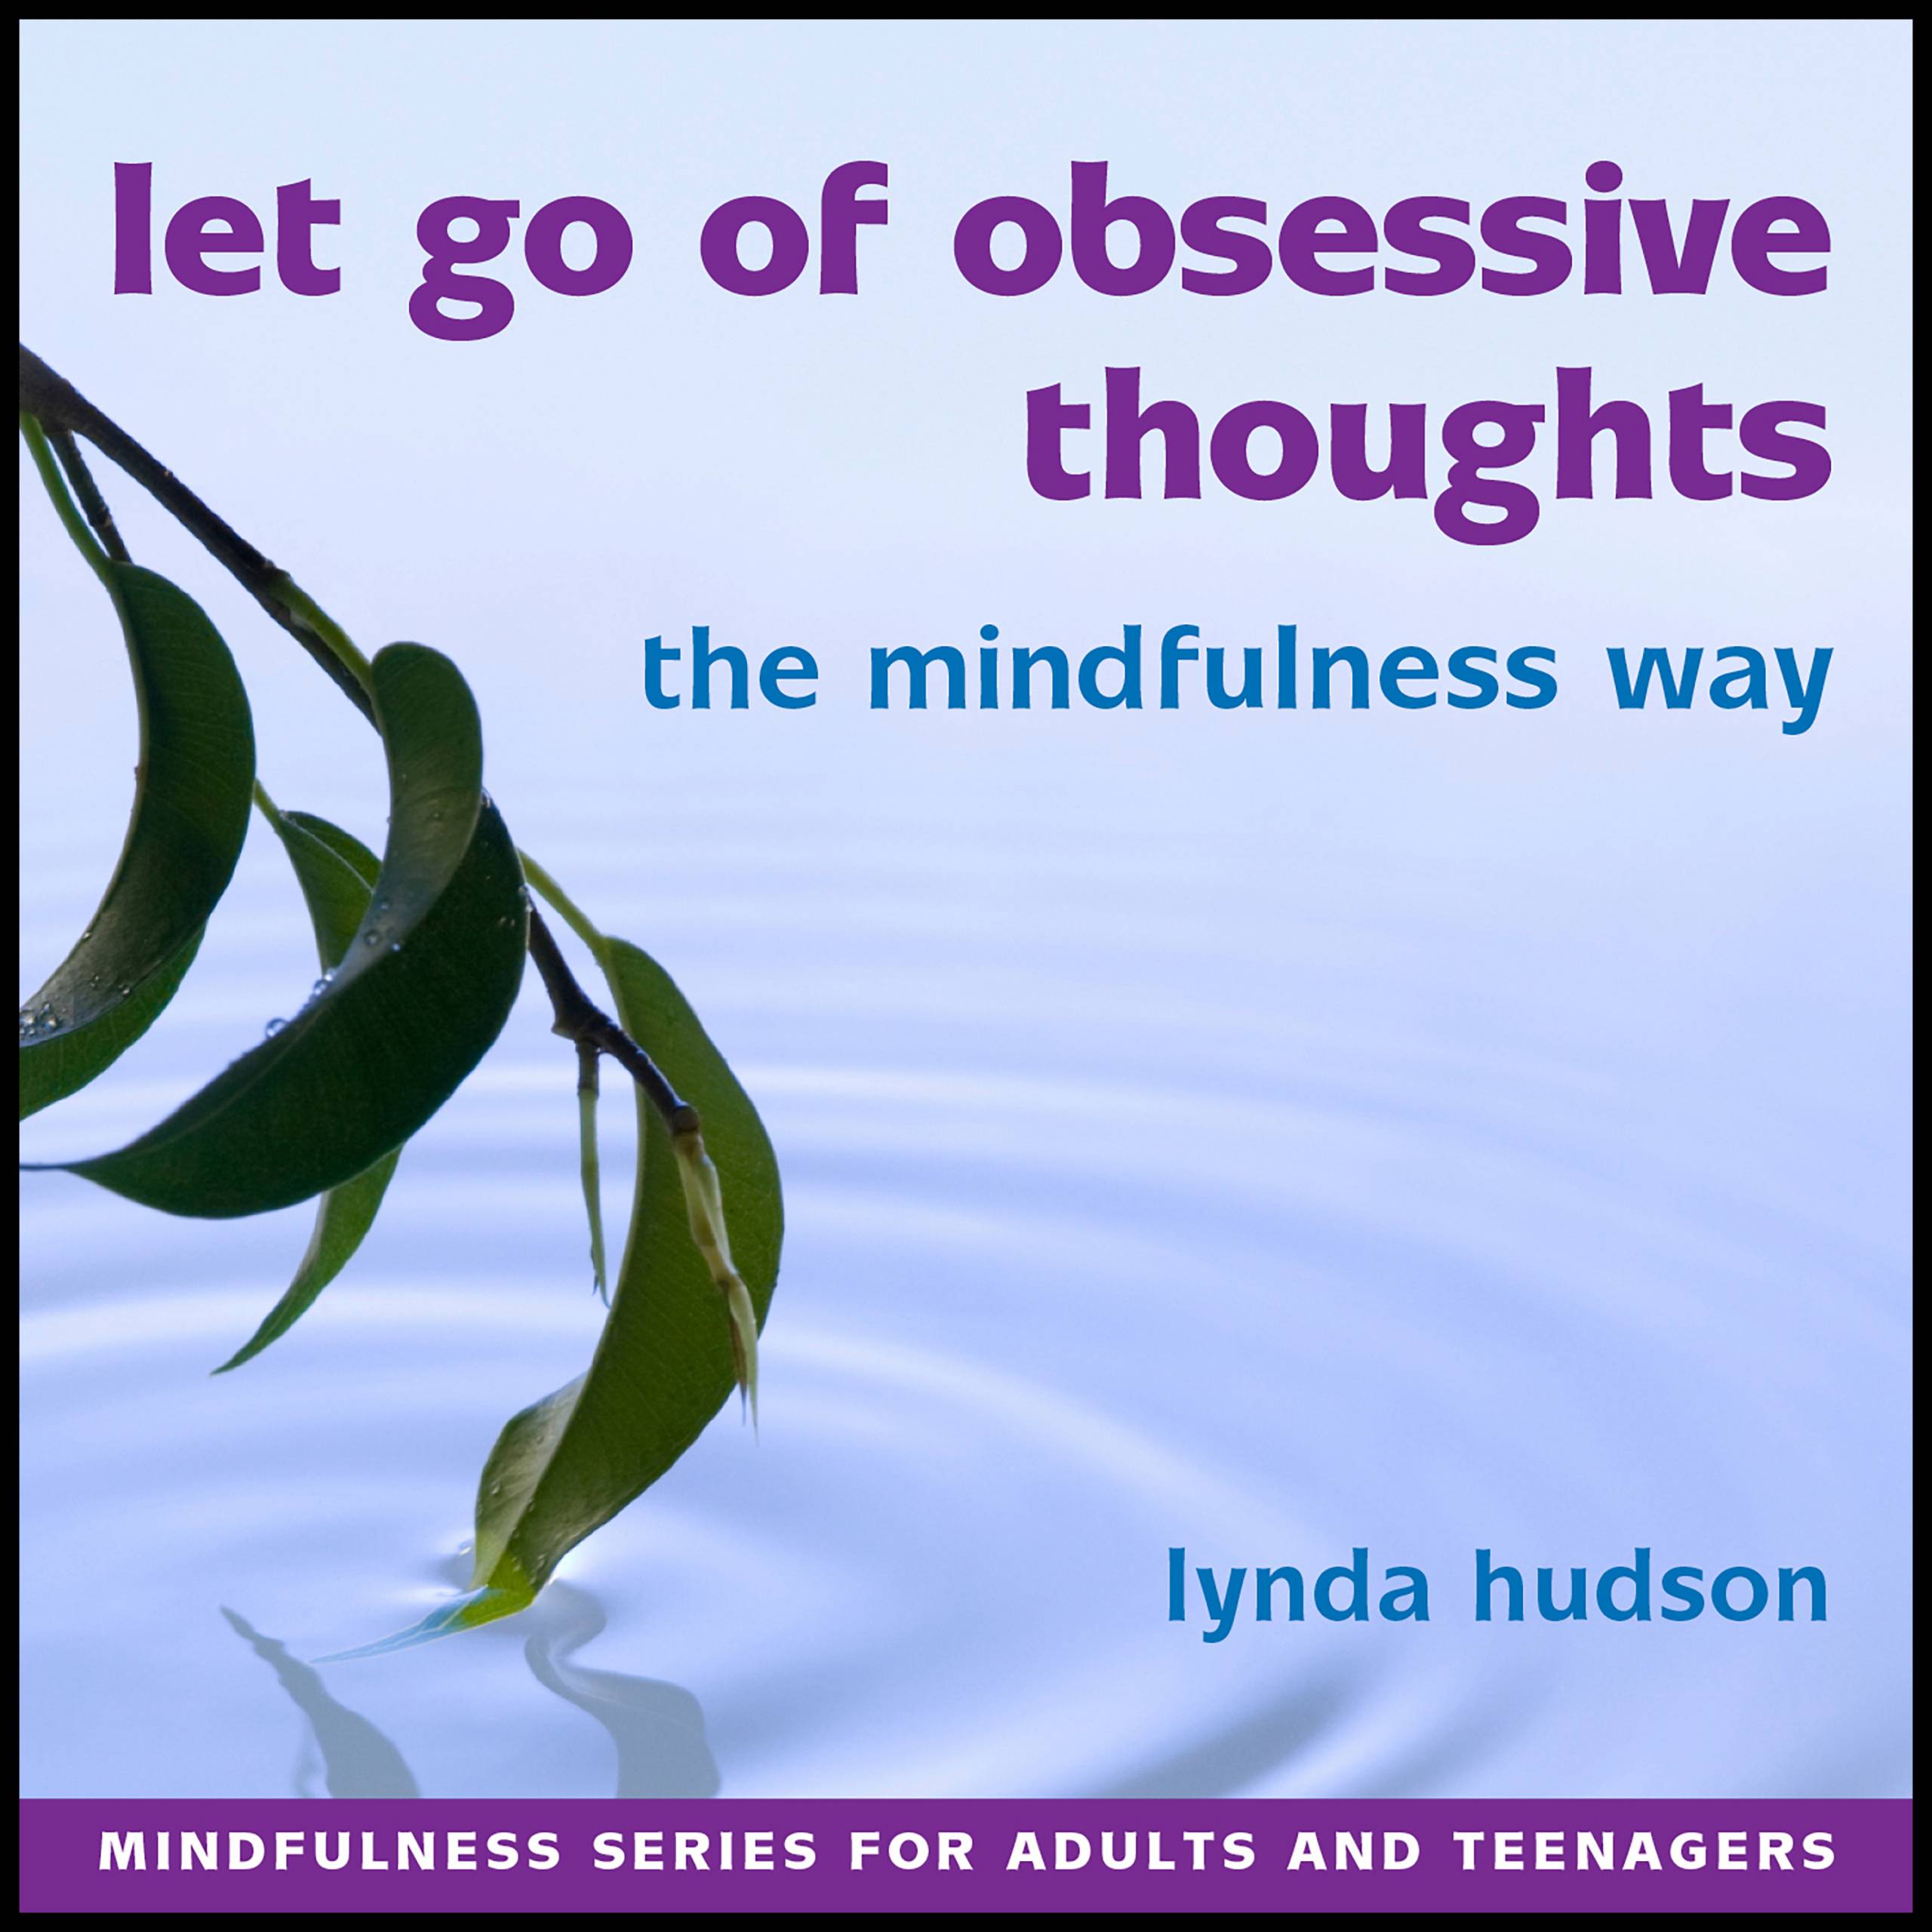 Let go of obsessive thoughts the mindfulness way